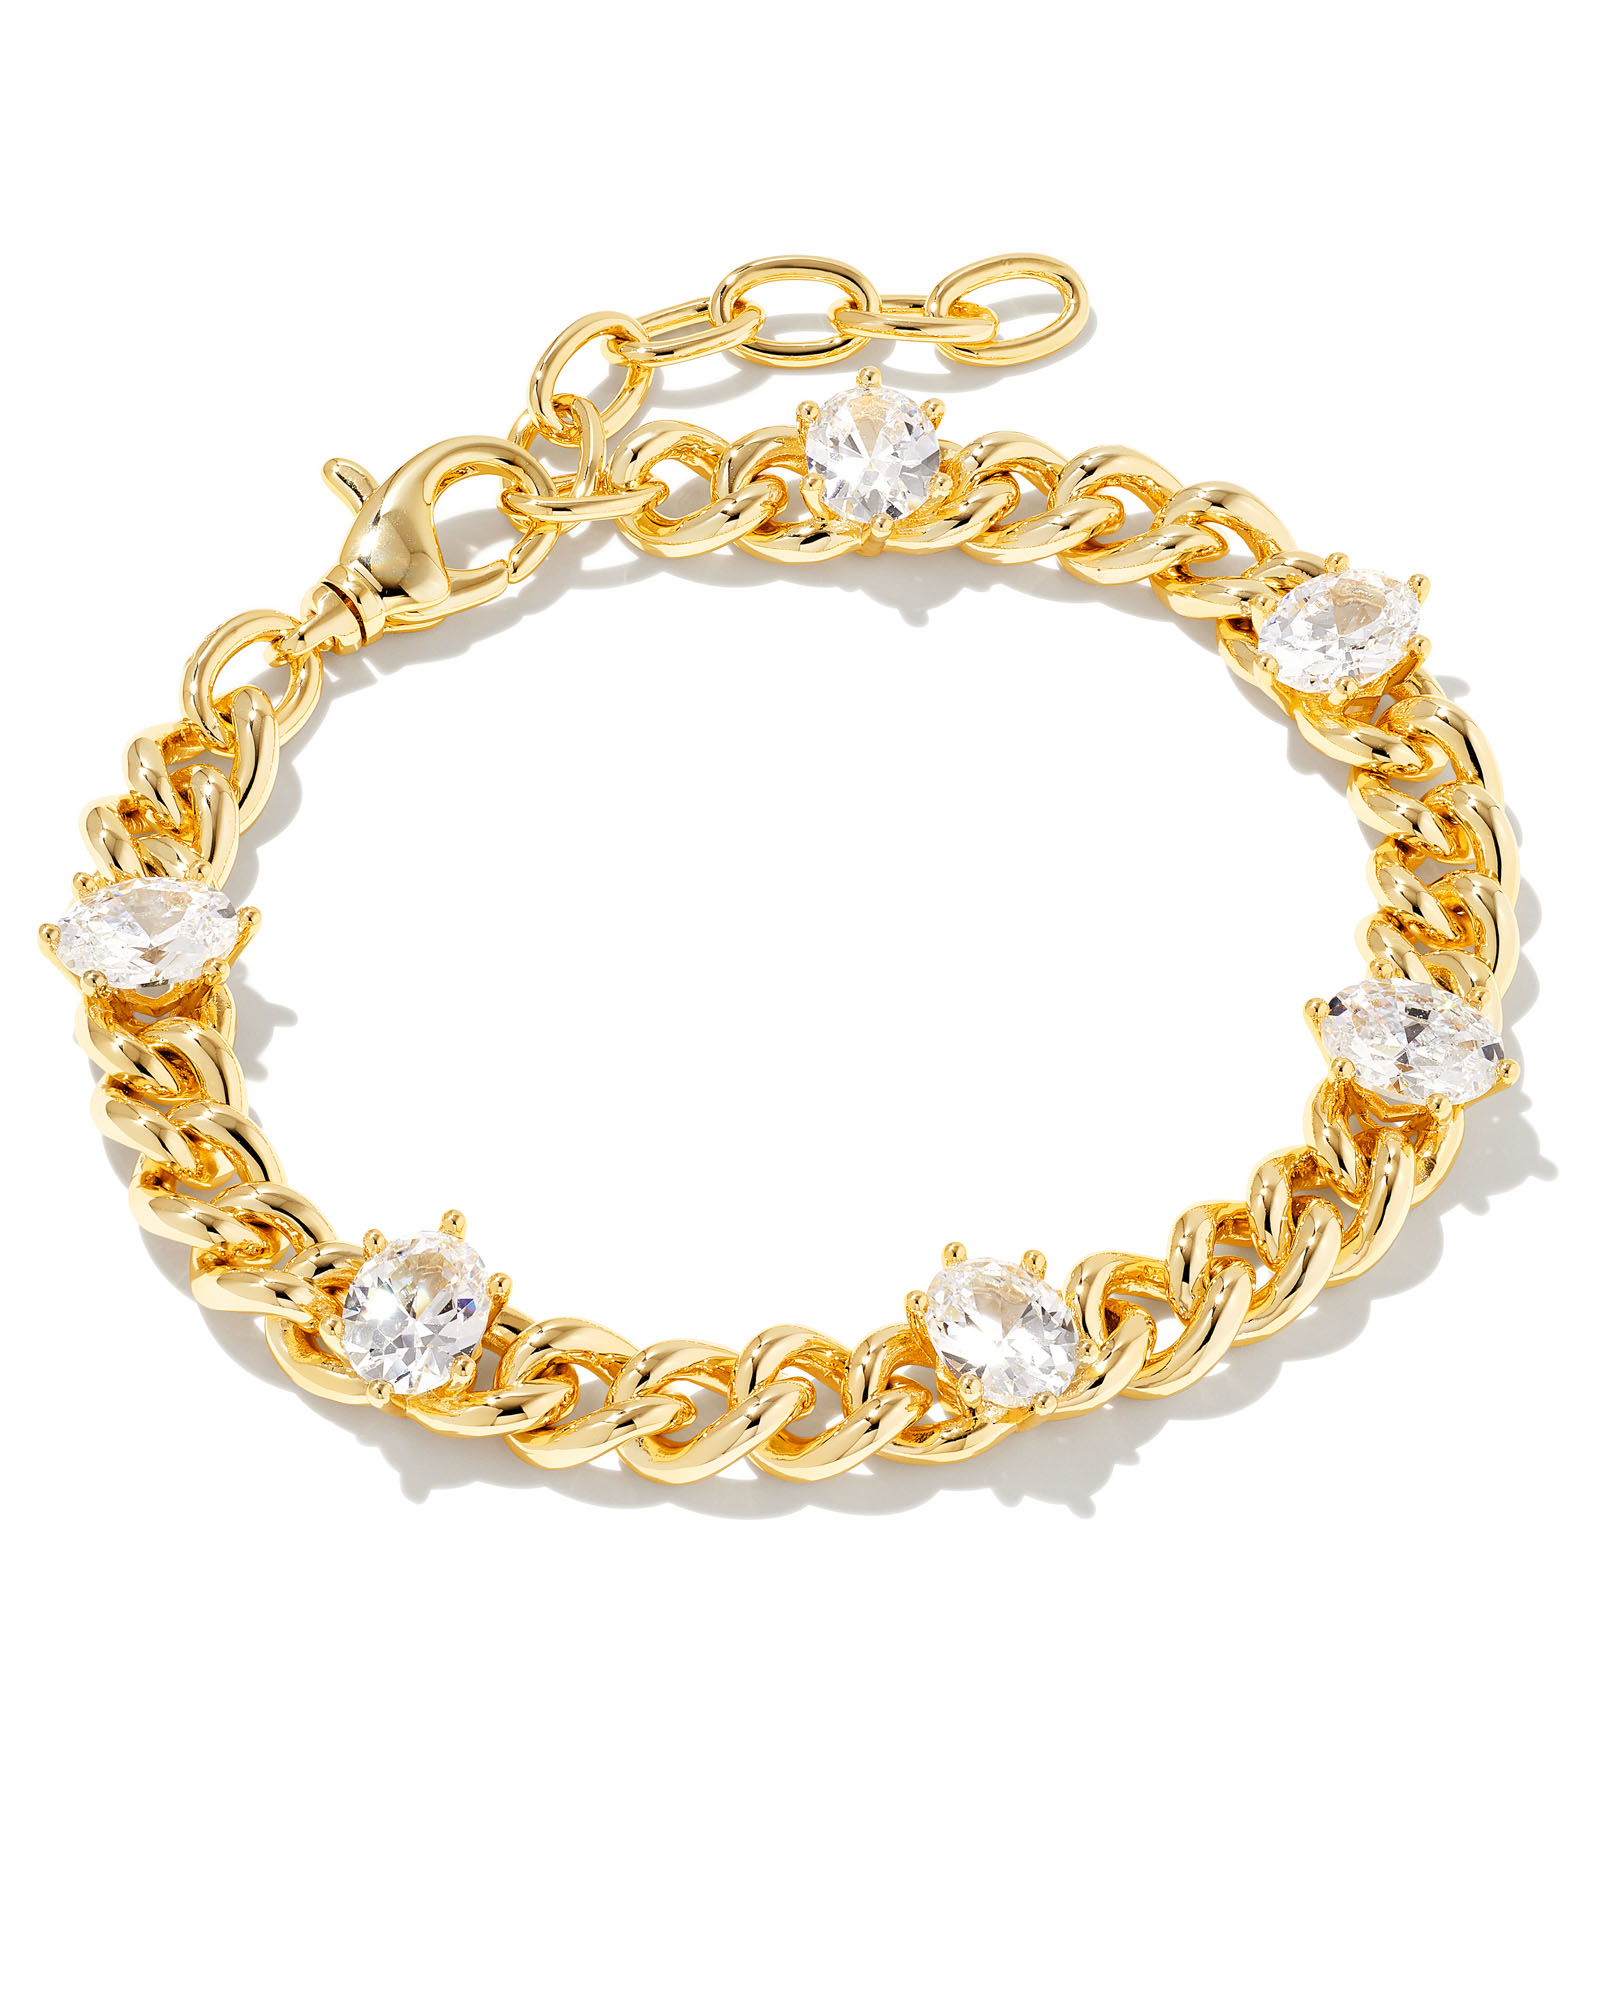 Cailin Gold Crystal Chain Bracelet in White Crystal | Kendra Scott